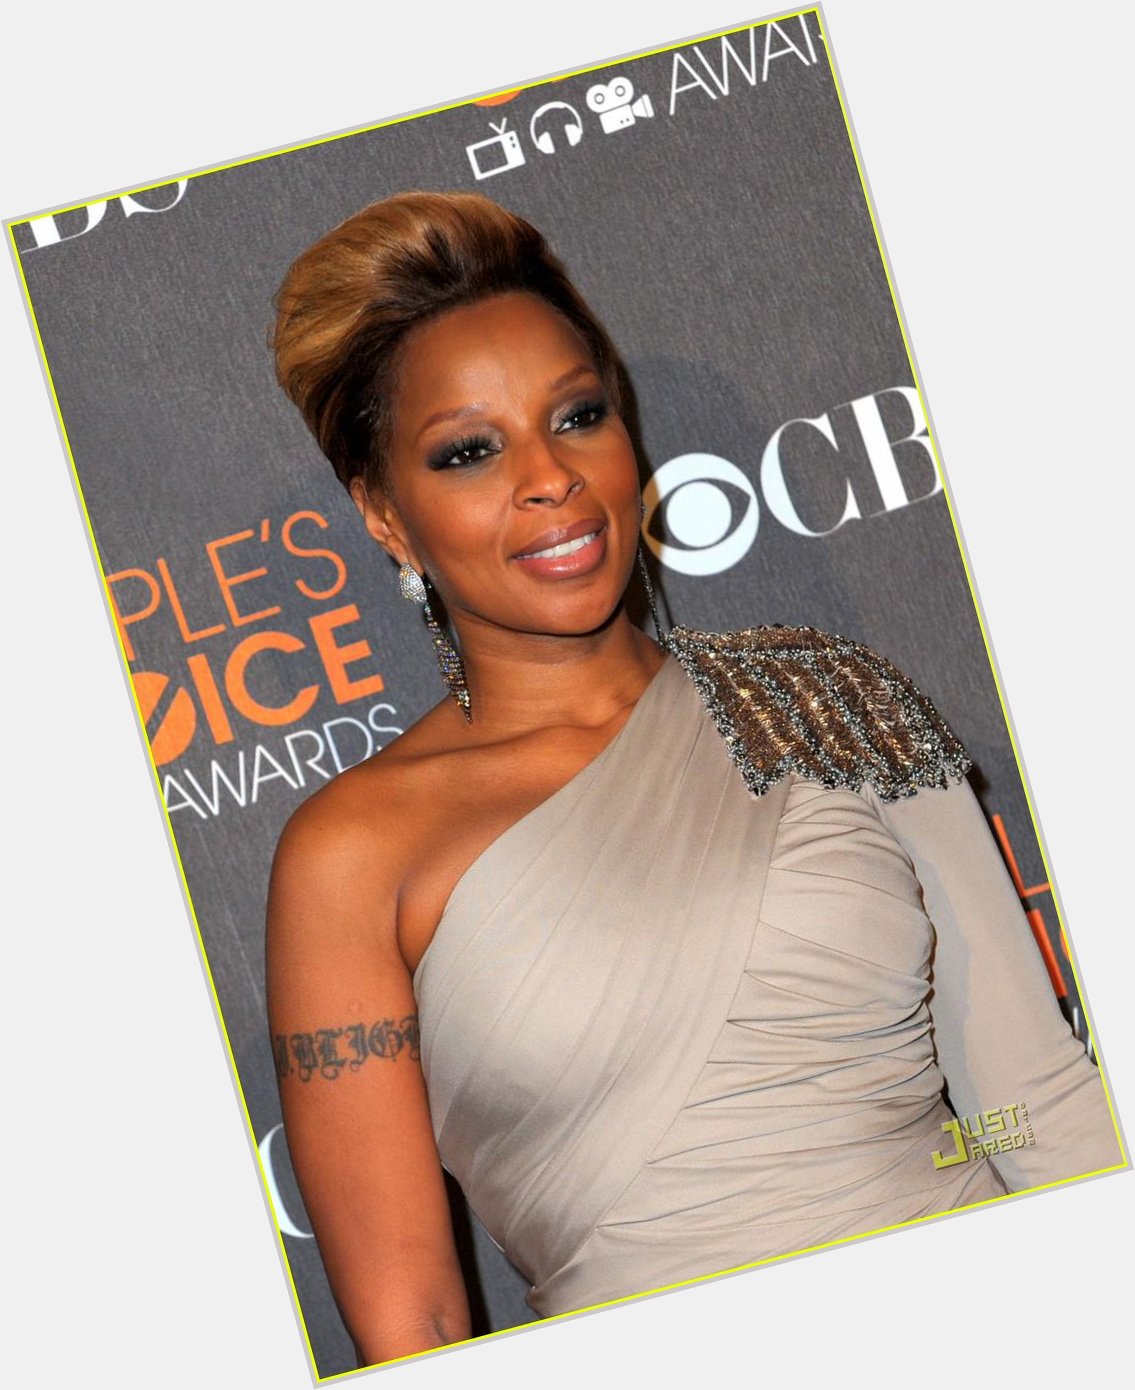 Happy Birthday to Mary J. Blige, who turns 44 today! 